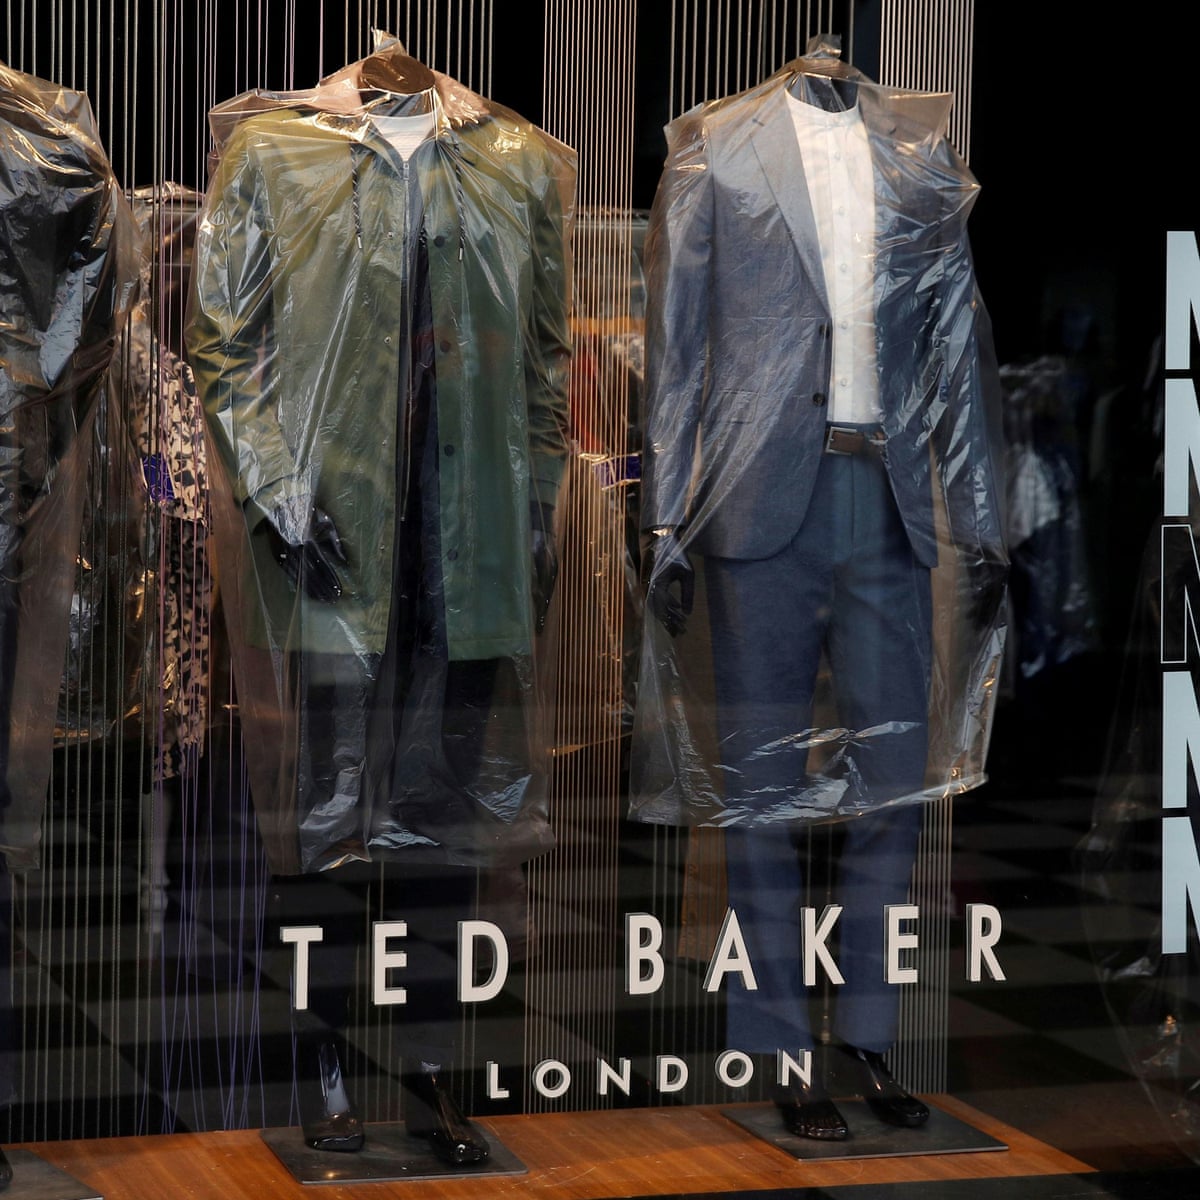 Ted Baker plans stores in commuter towns as it loses £100m | Ted Baker | The Guardian